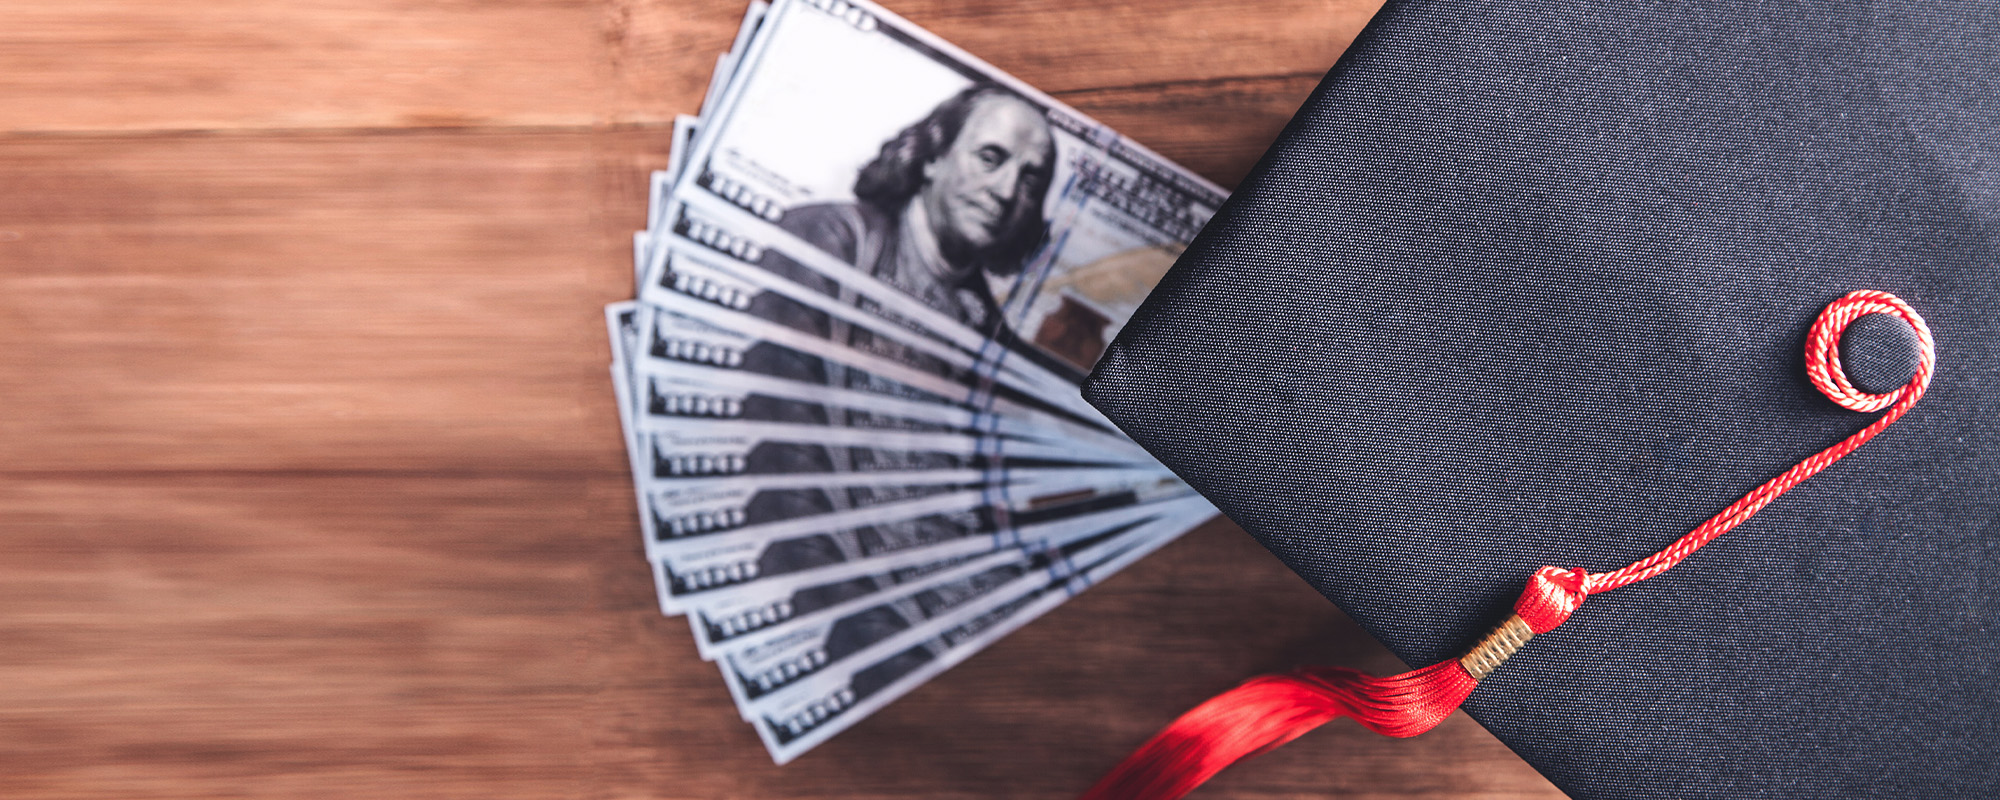 graduation hat and money on wooden table.